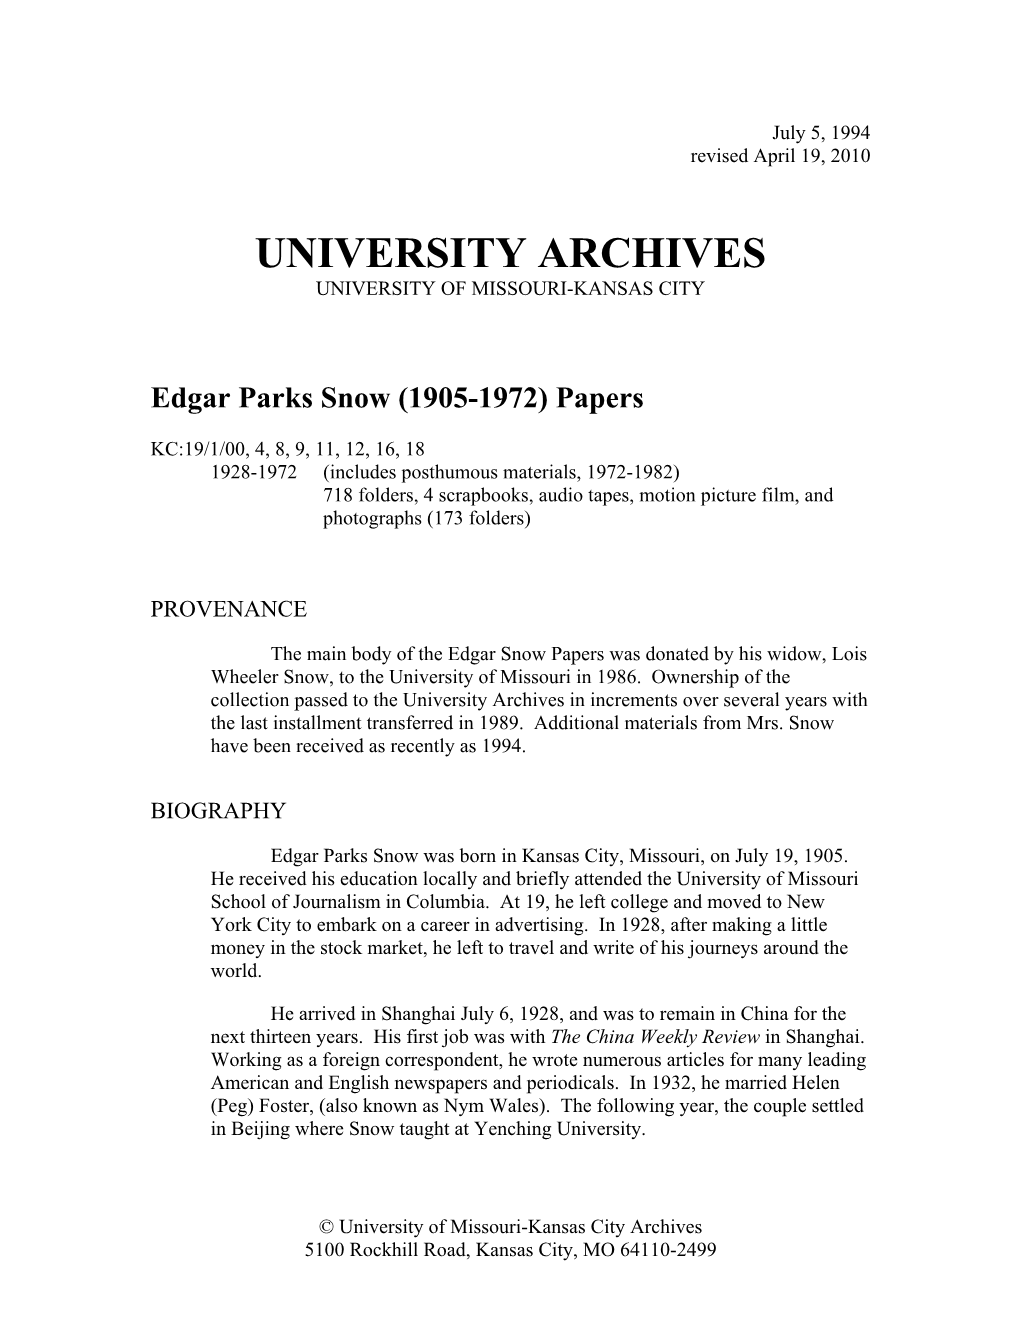 Edgar Parks Snow Collection Finding Aid (PDF)